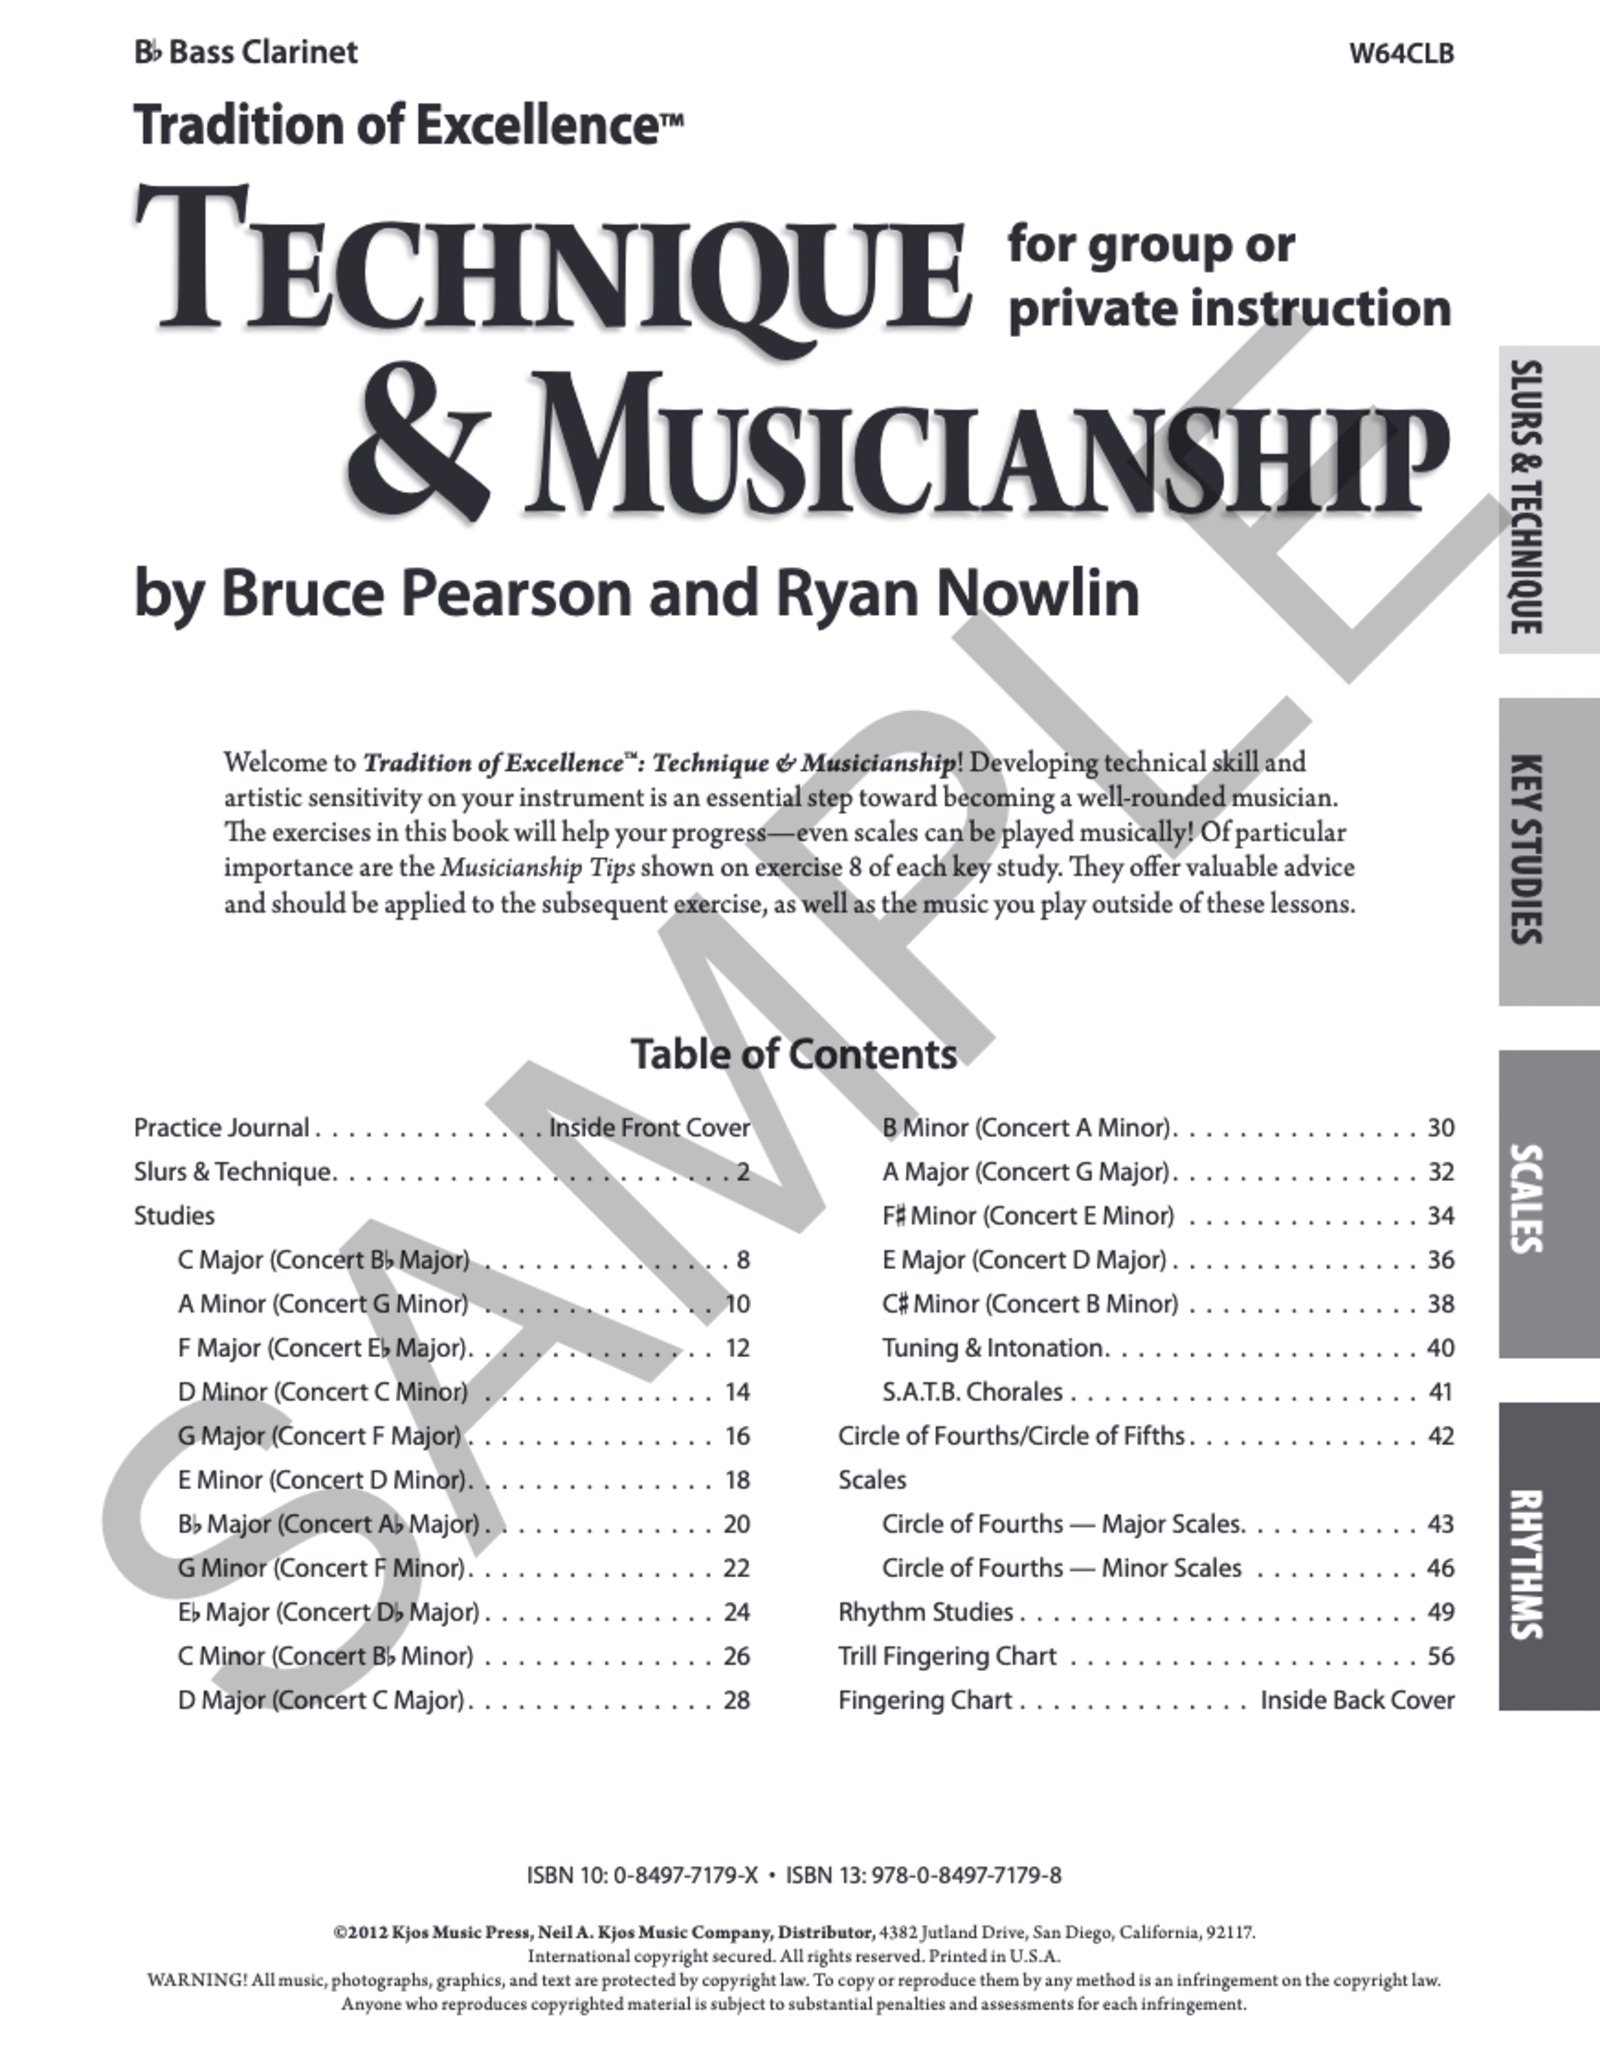 Kjos Tradition of Excellence: Technique and Musicianship - Bass Clarinet